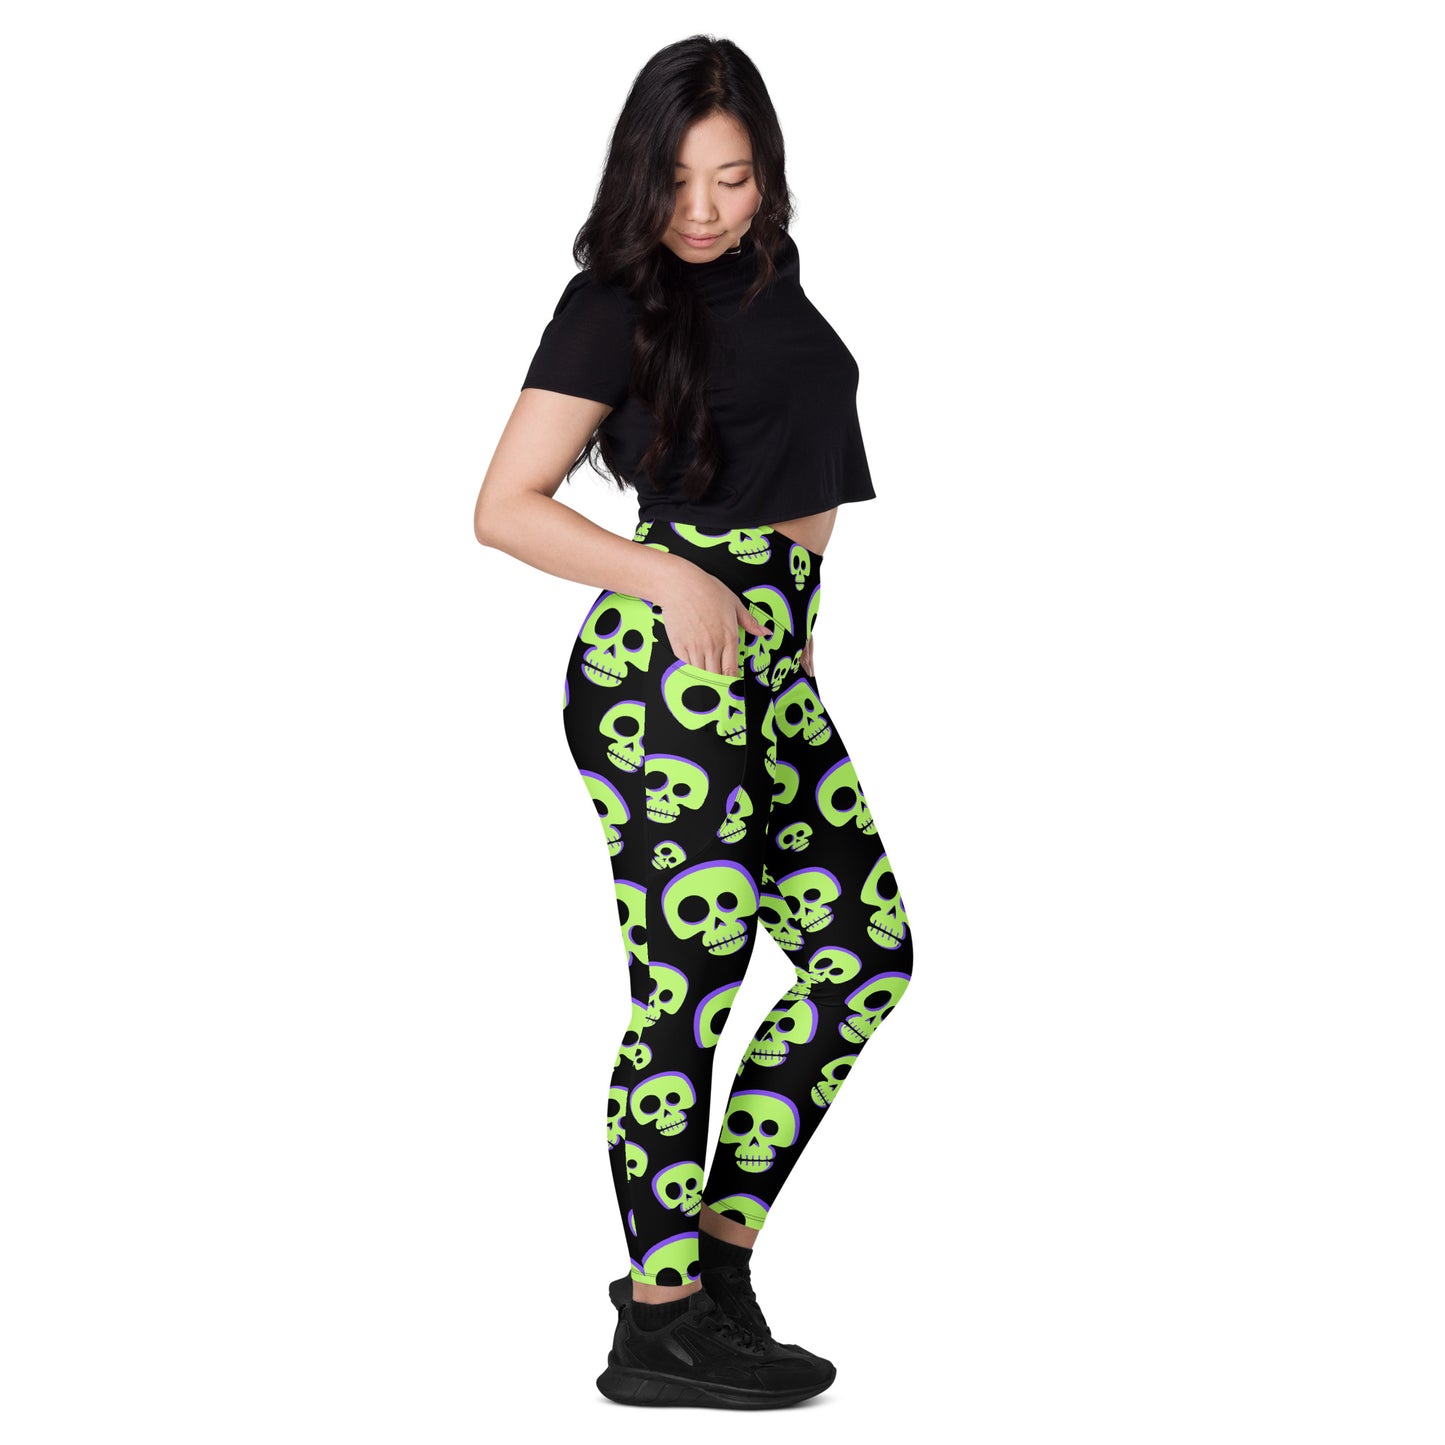 "The Zombie" Leggings with pockets